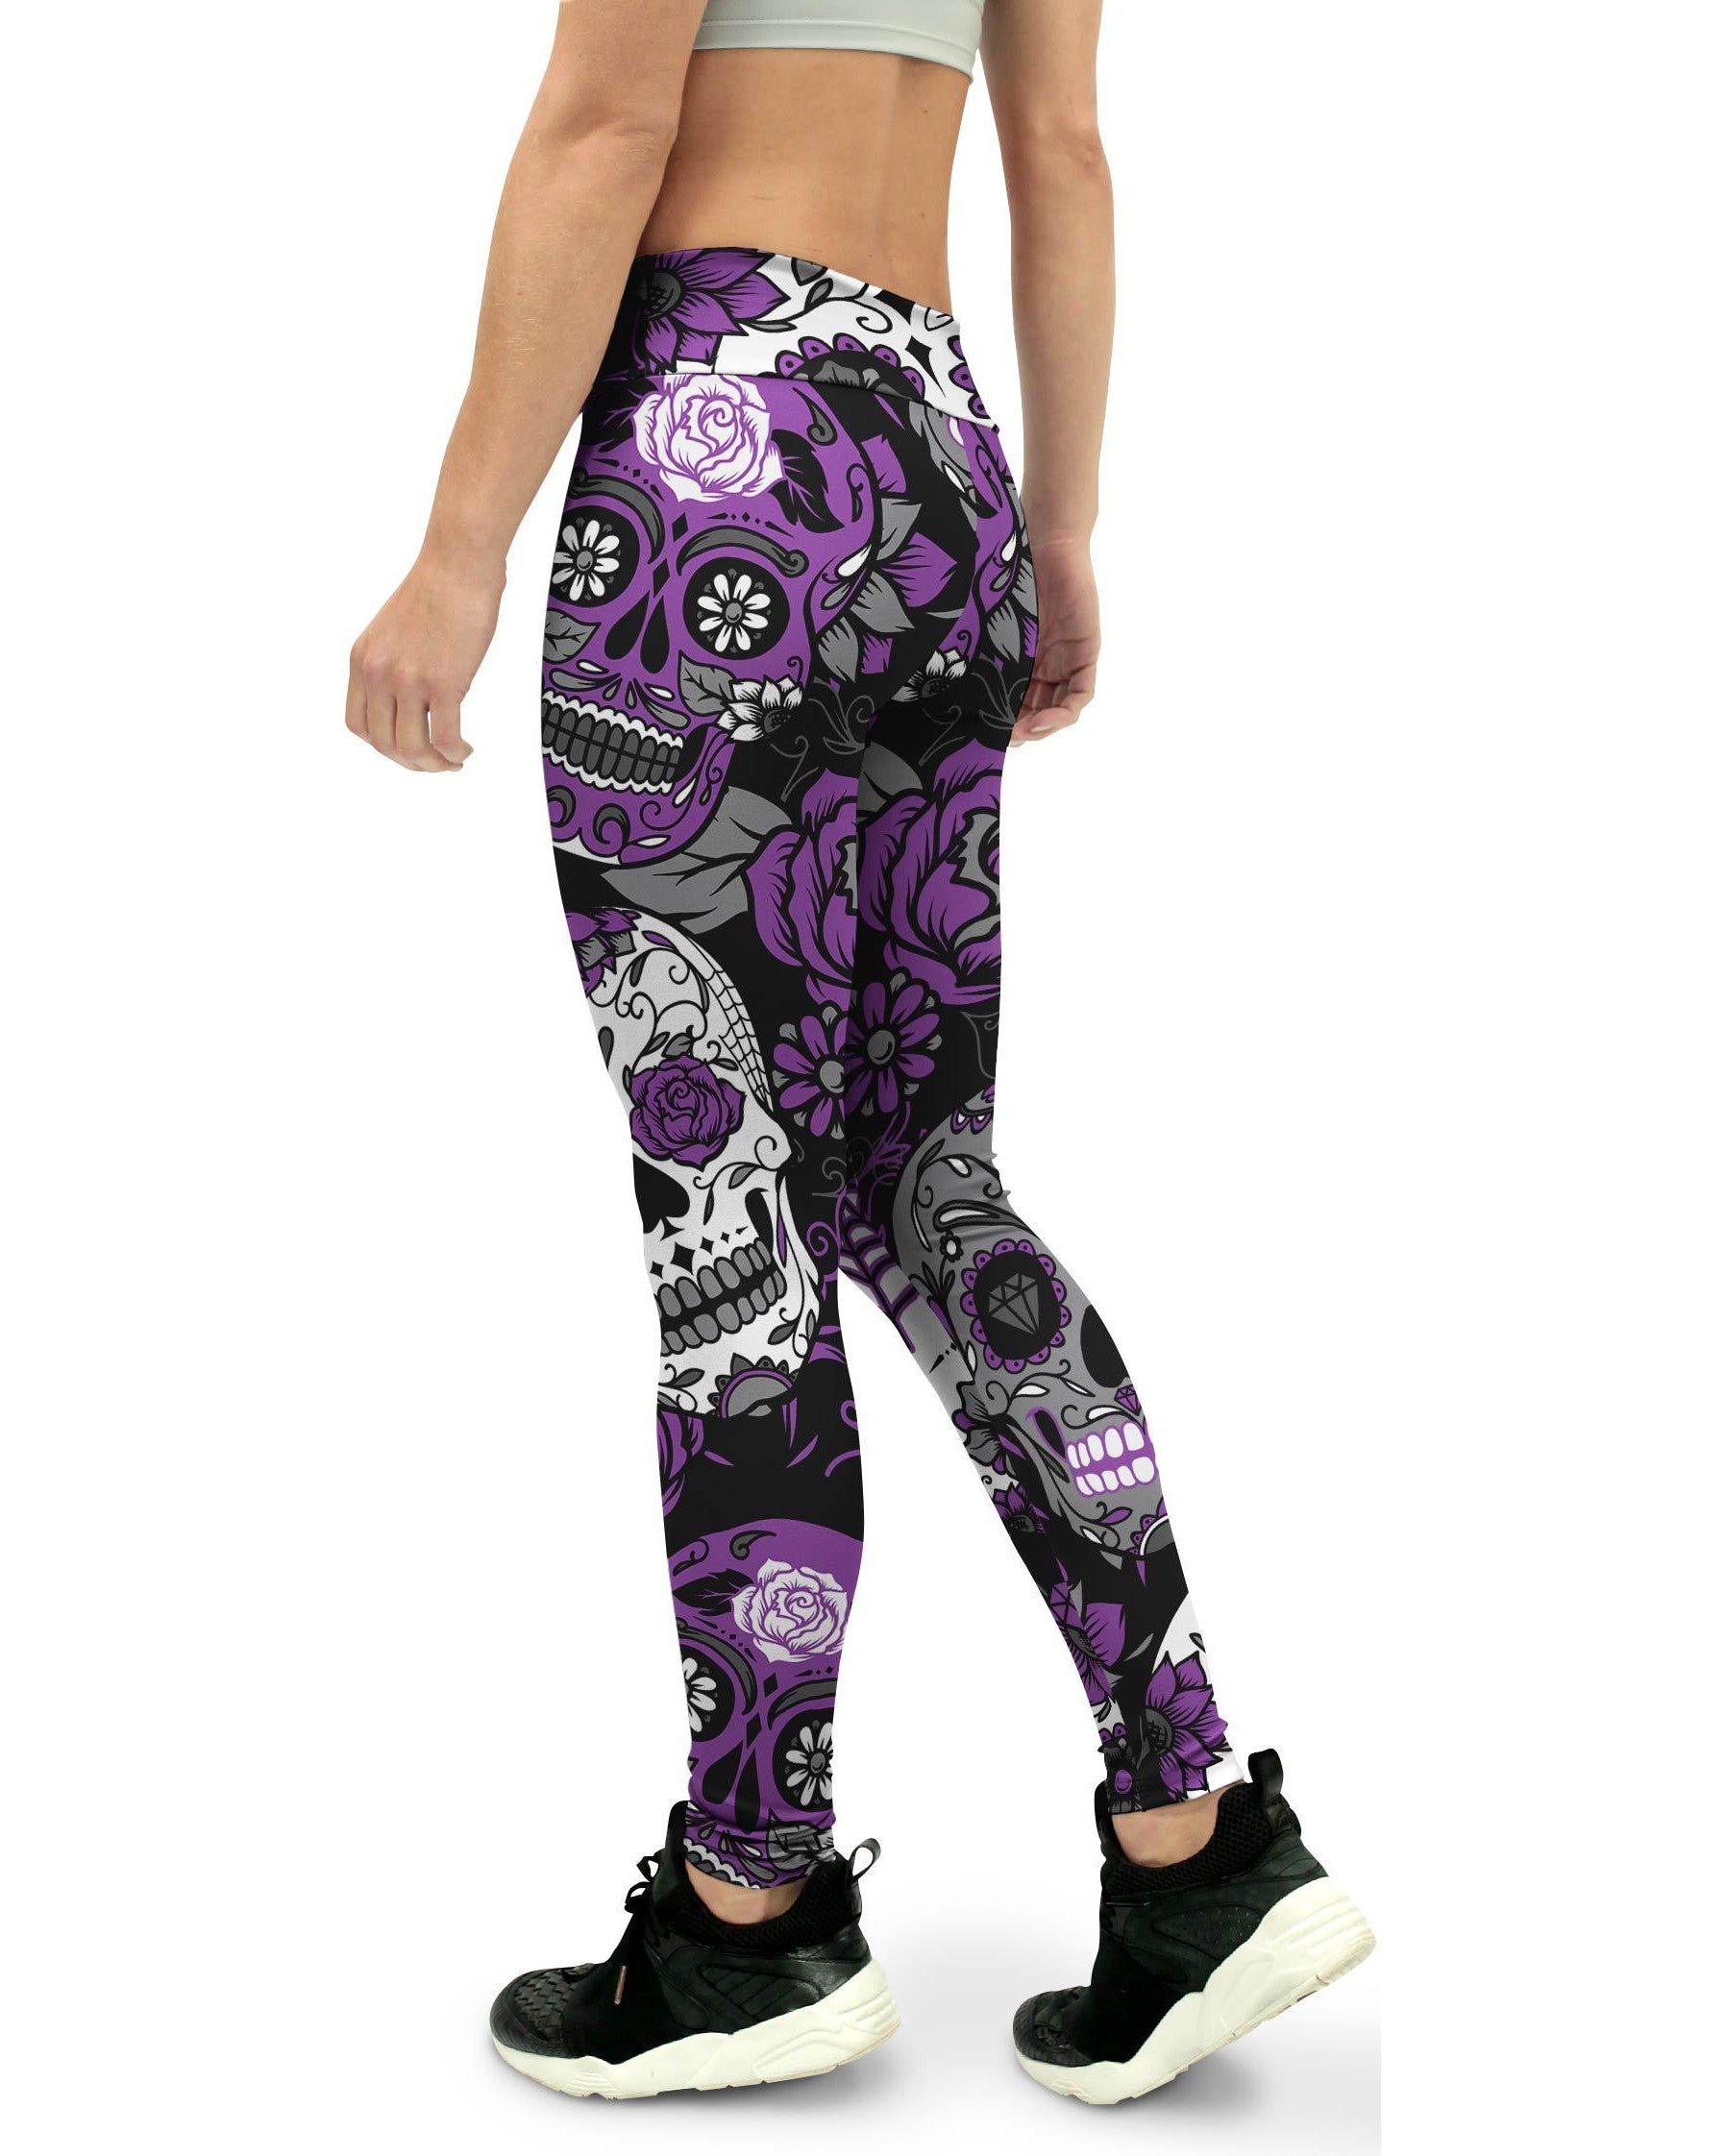 58 Simple Workout pants with skulls for Women